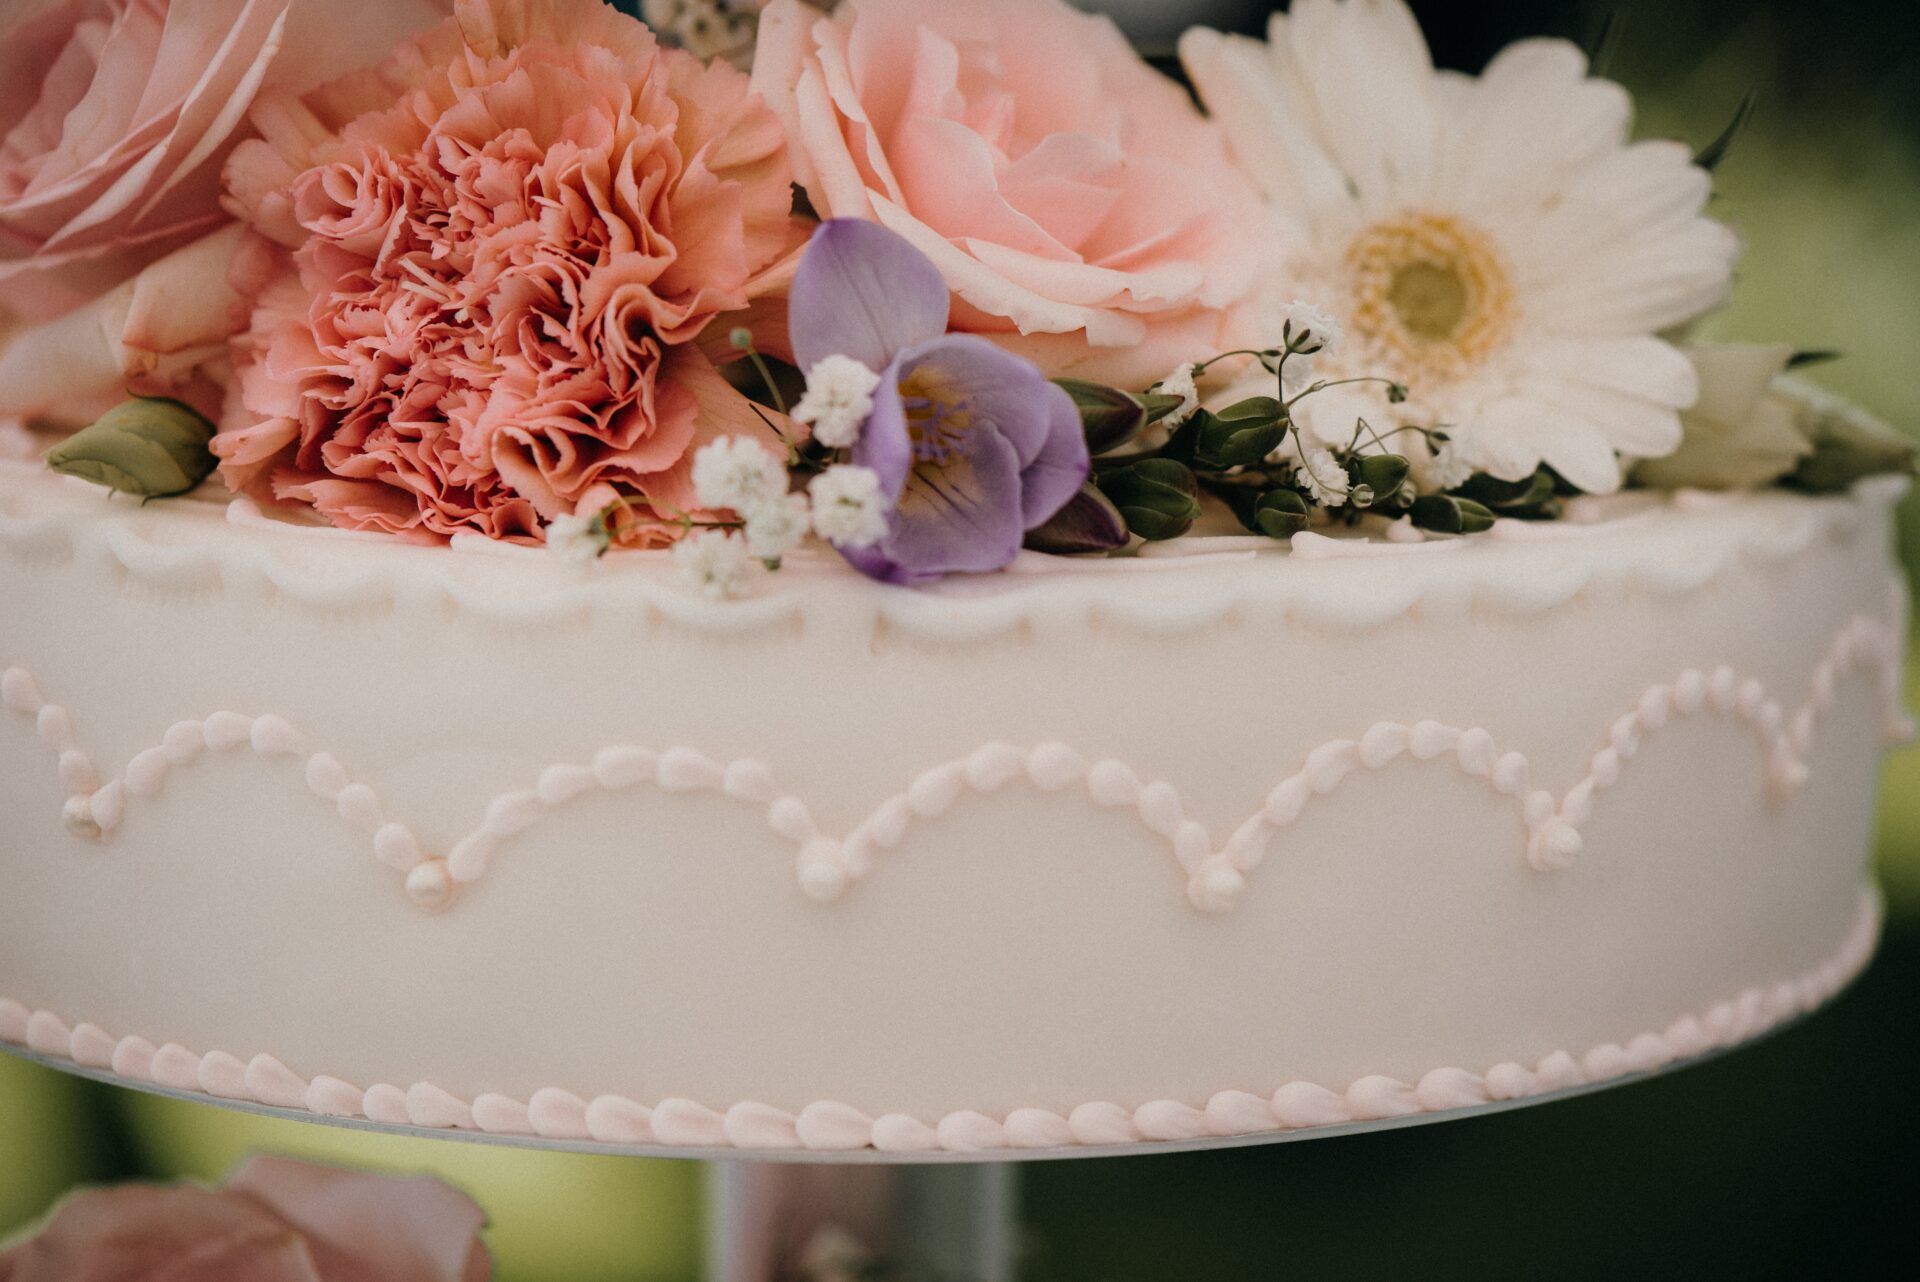 Close up of wedding cake with flowers on it